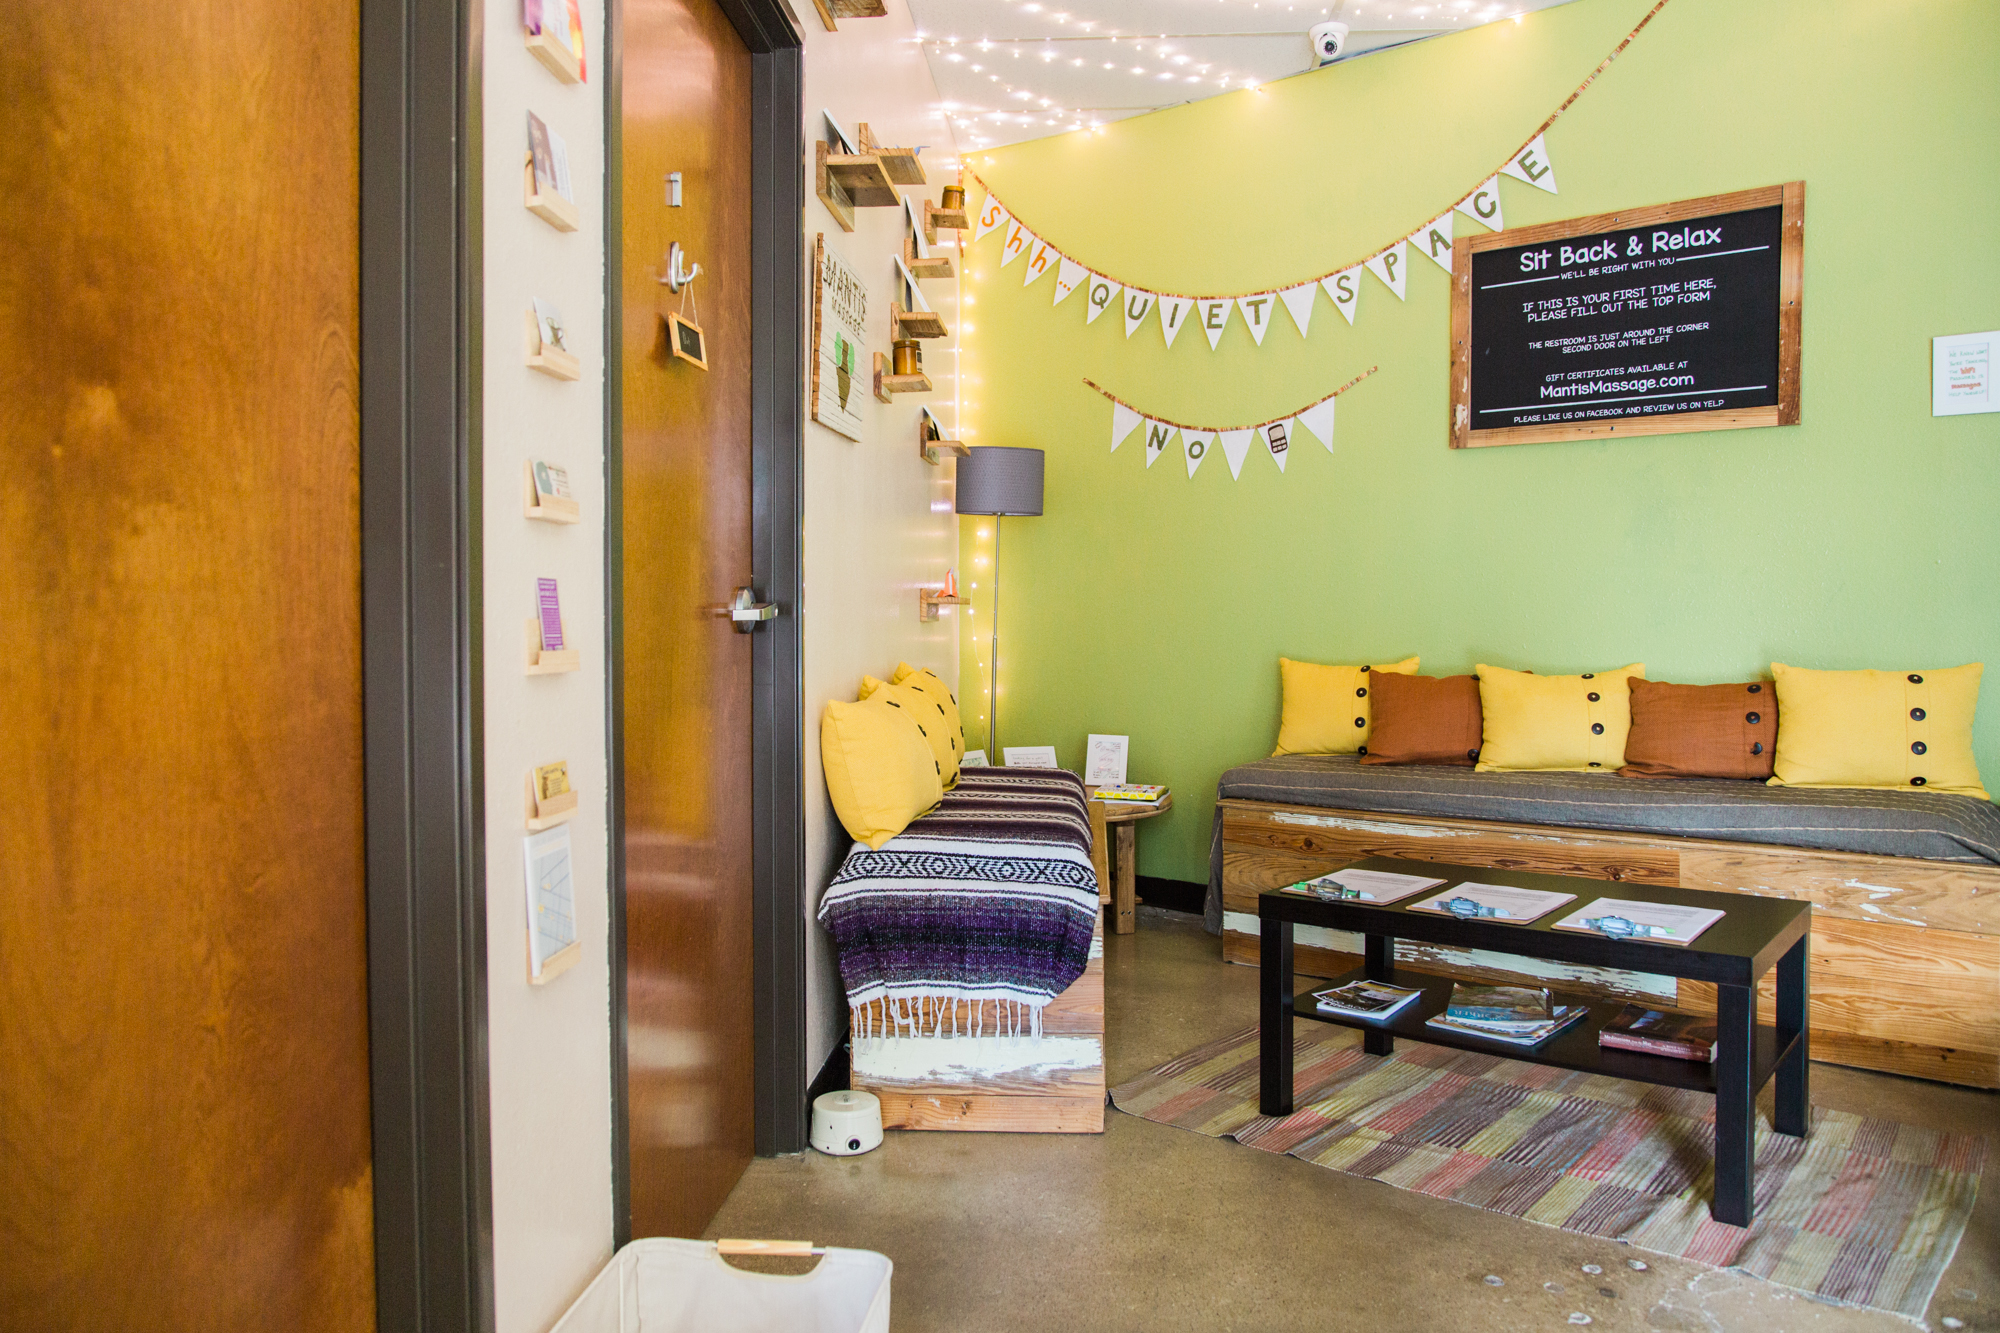  Image shows Mantis Massage Therapy Studio's cozy waiting area in Austin, Texas, plush seating surrounded by warm hues and soft lighting, creating a welcoming sanctuary for relaxation. Take a moment to escape the hustle and bustle of everyday life as